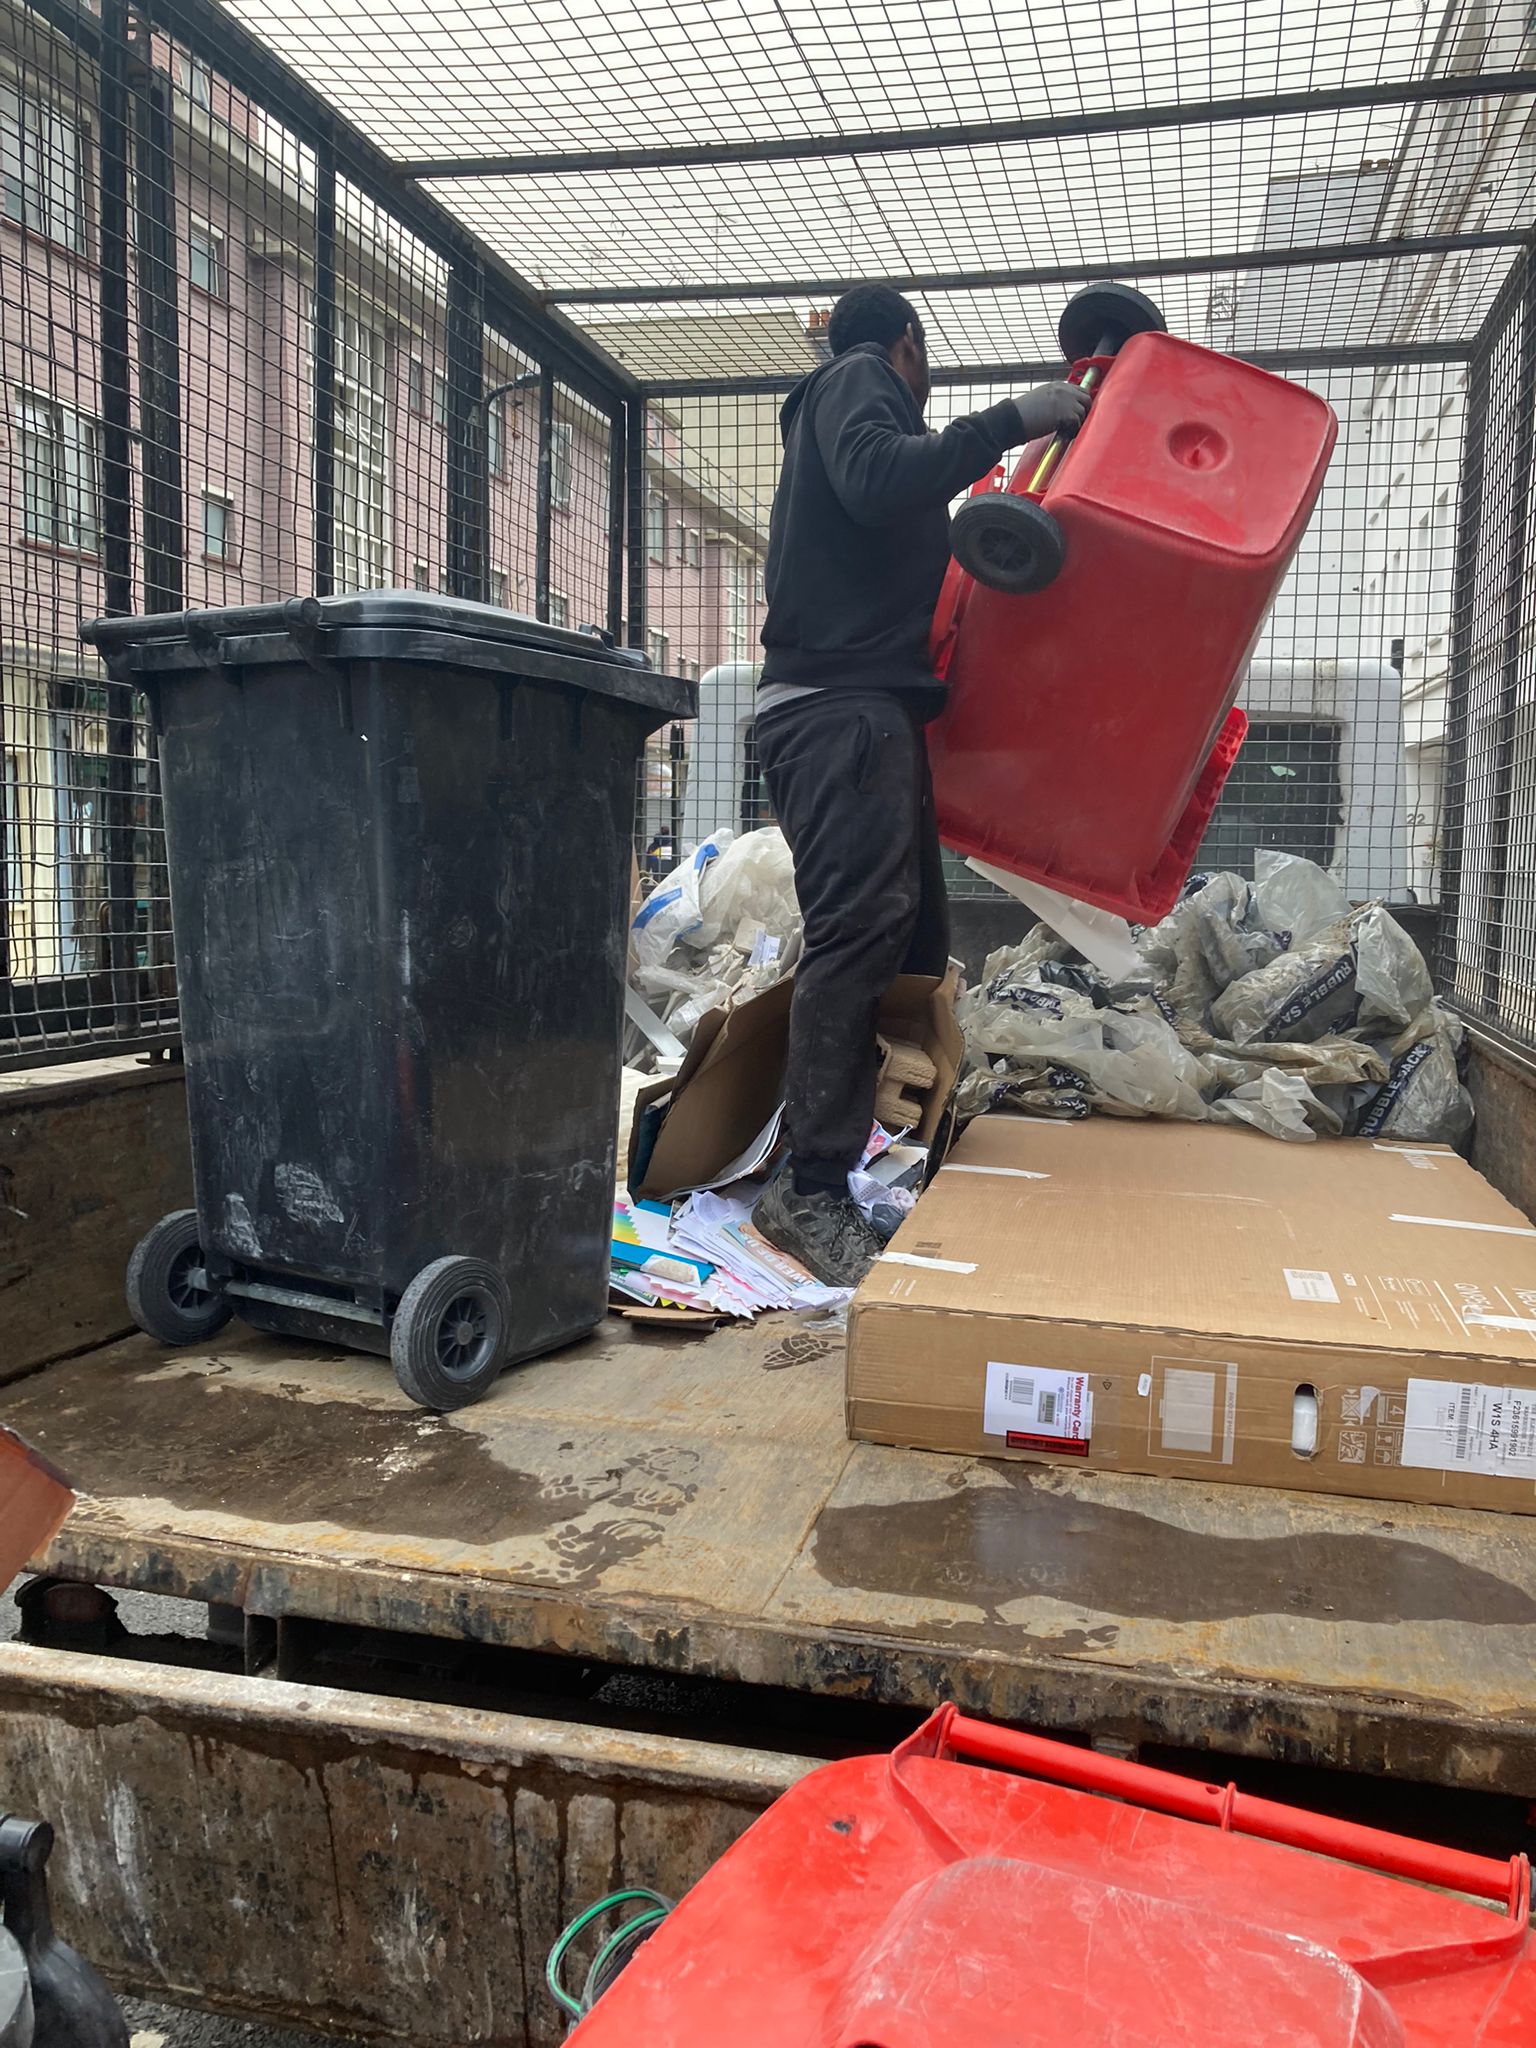 Rubbish Clearance Services in South East England and London